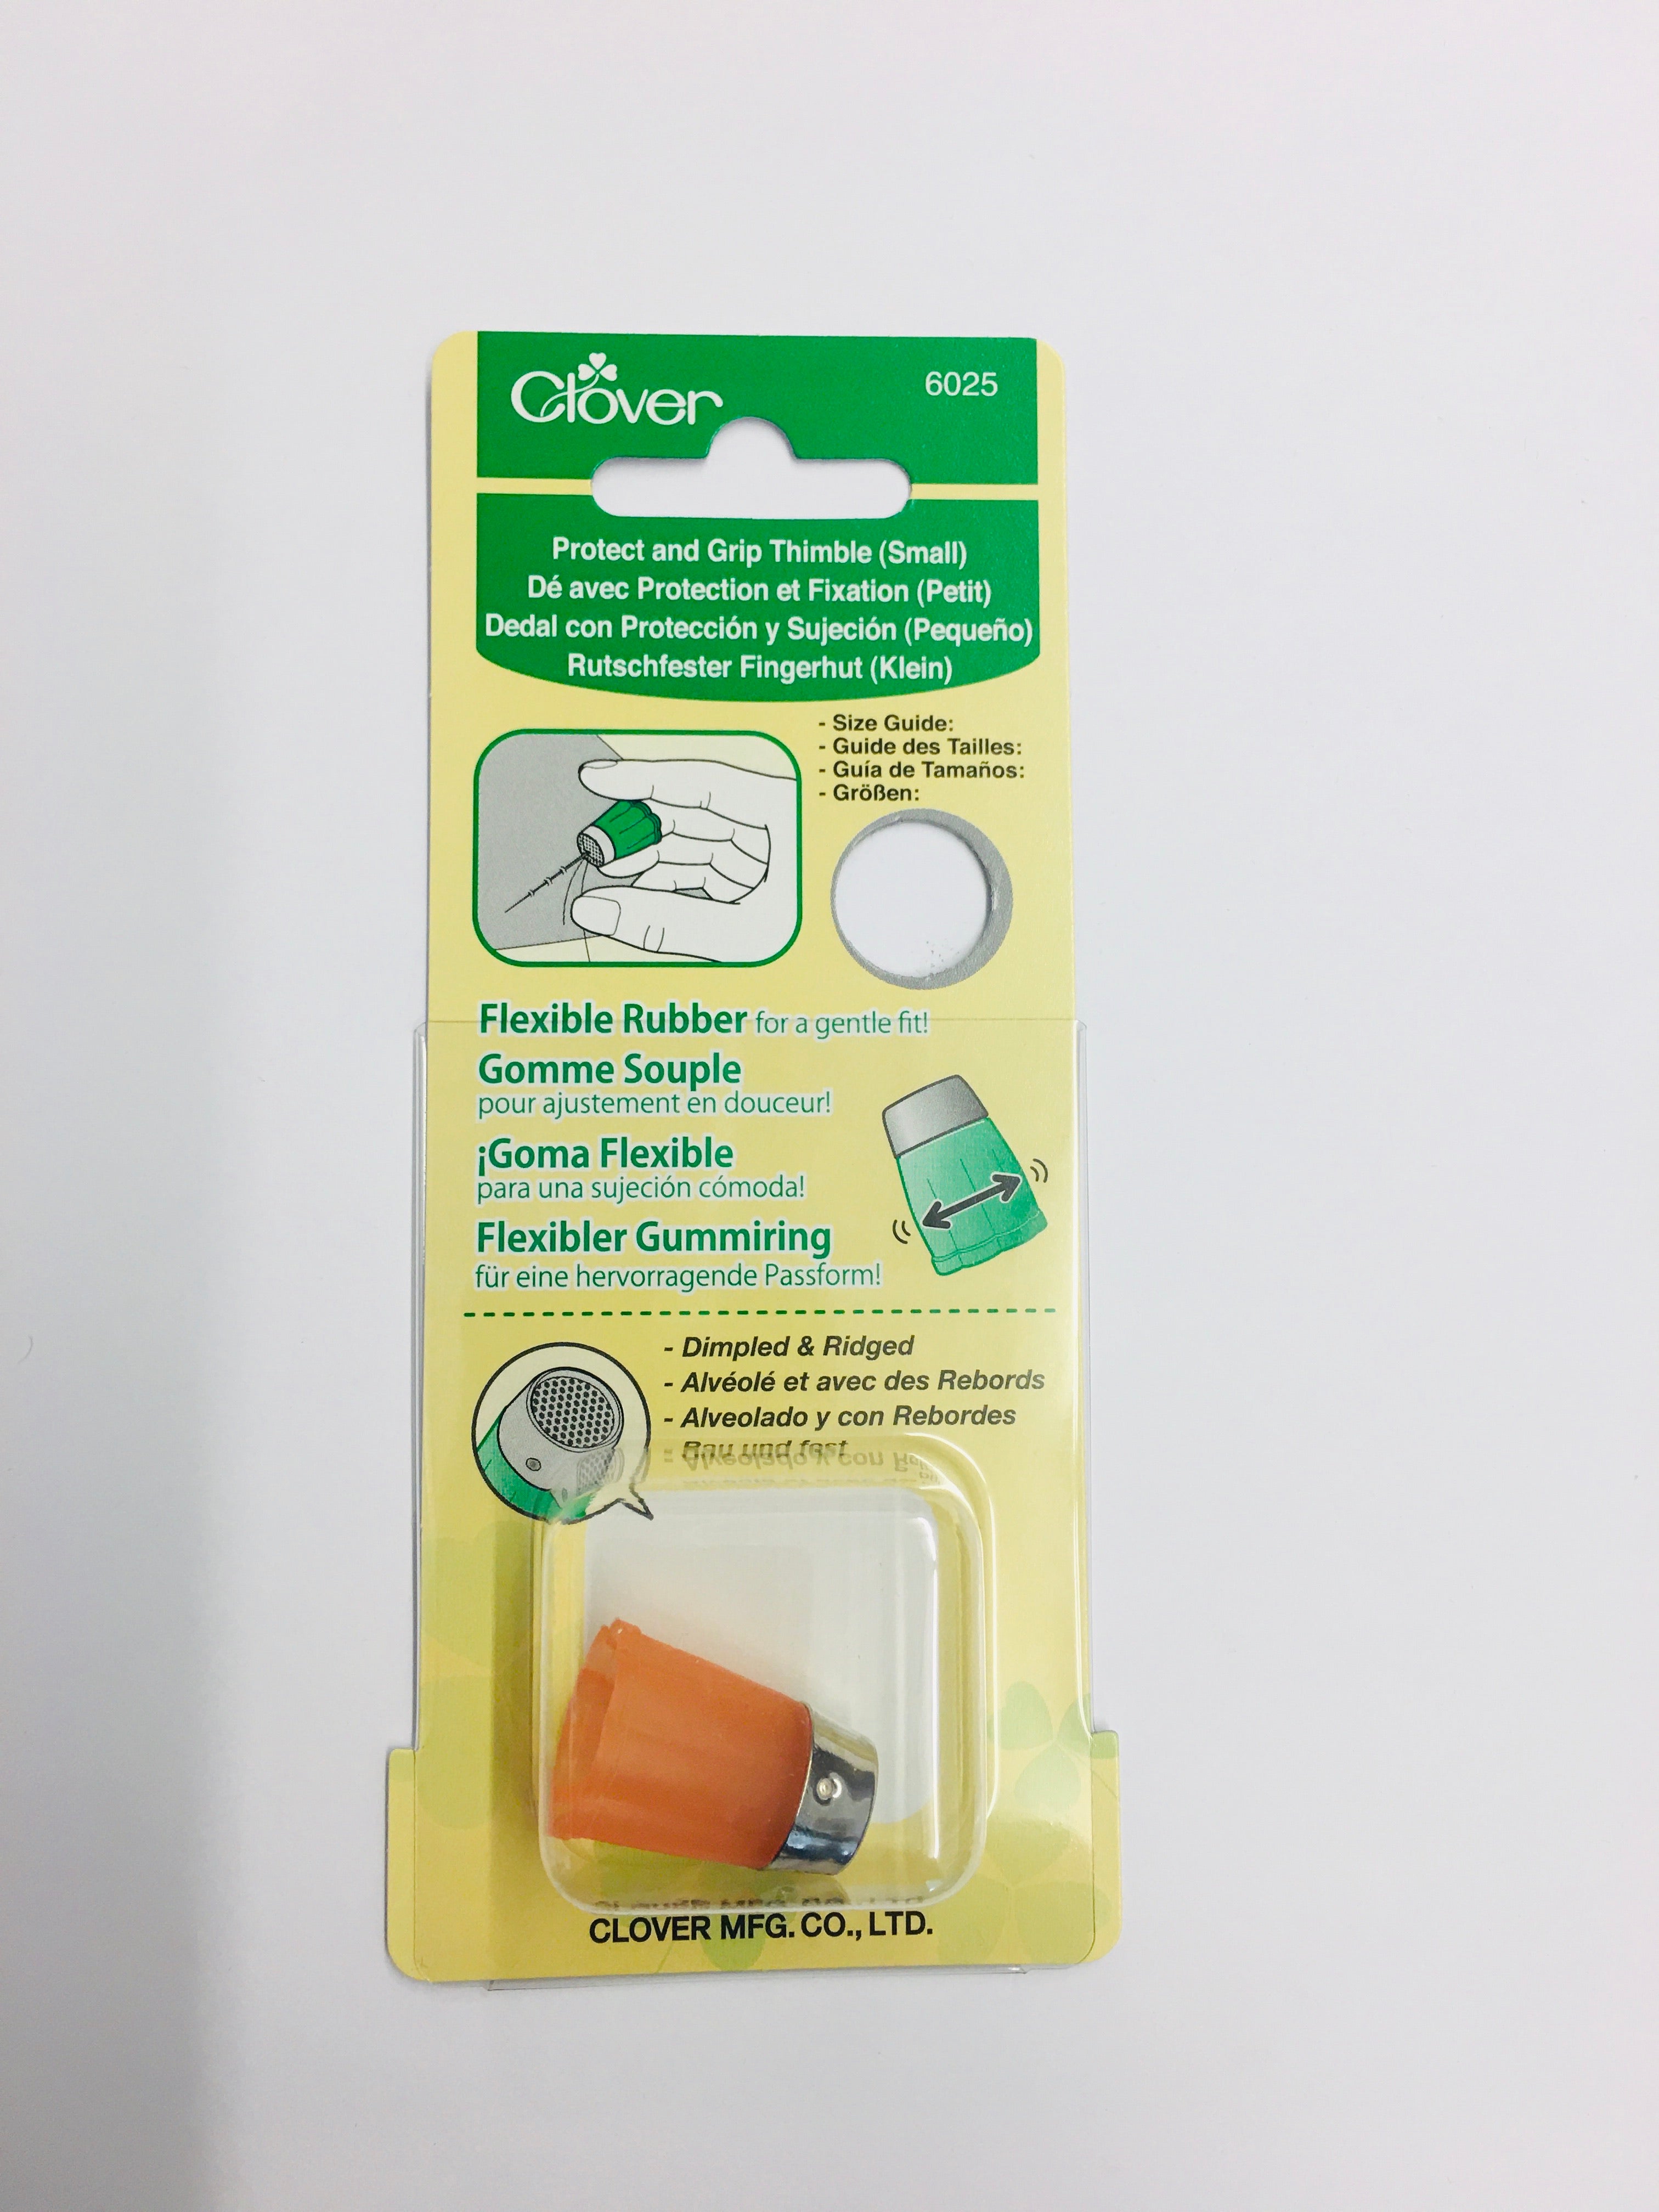 Clover Protect and Grip Thimble Small